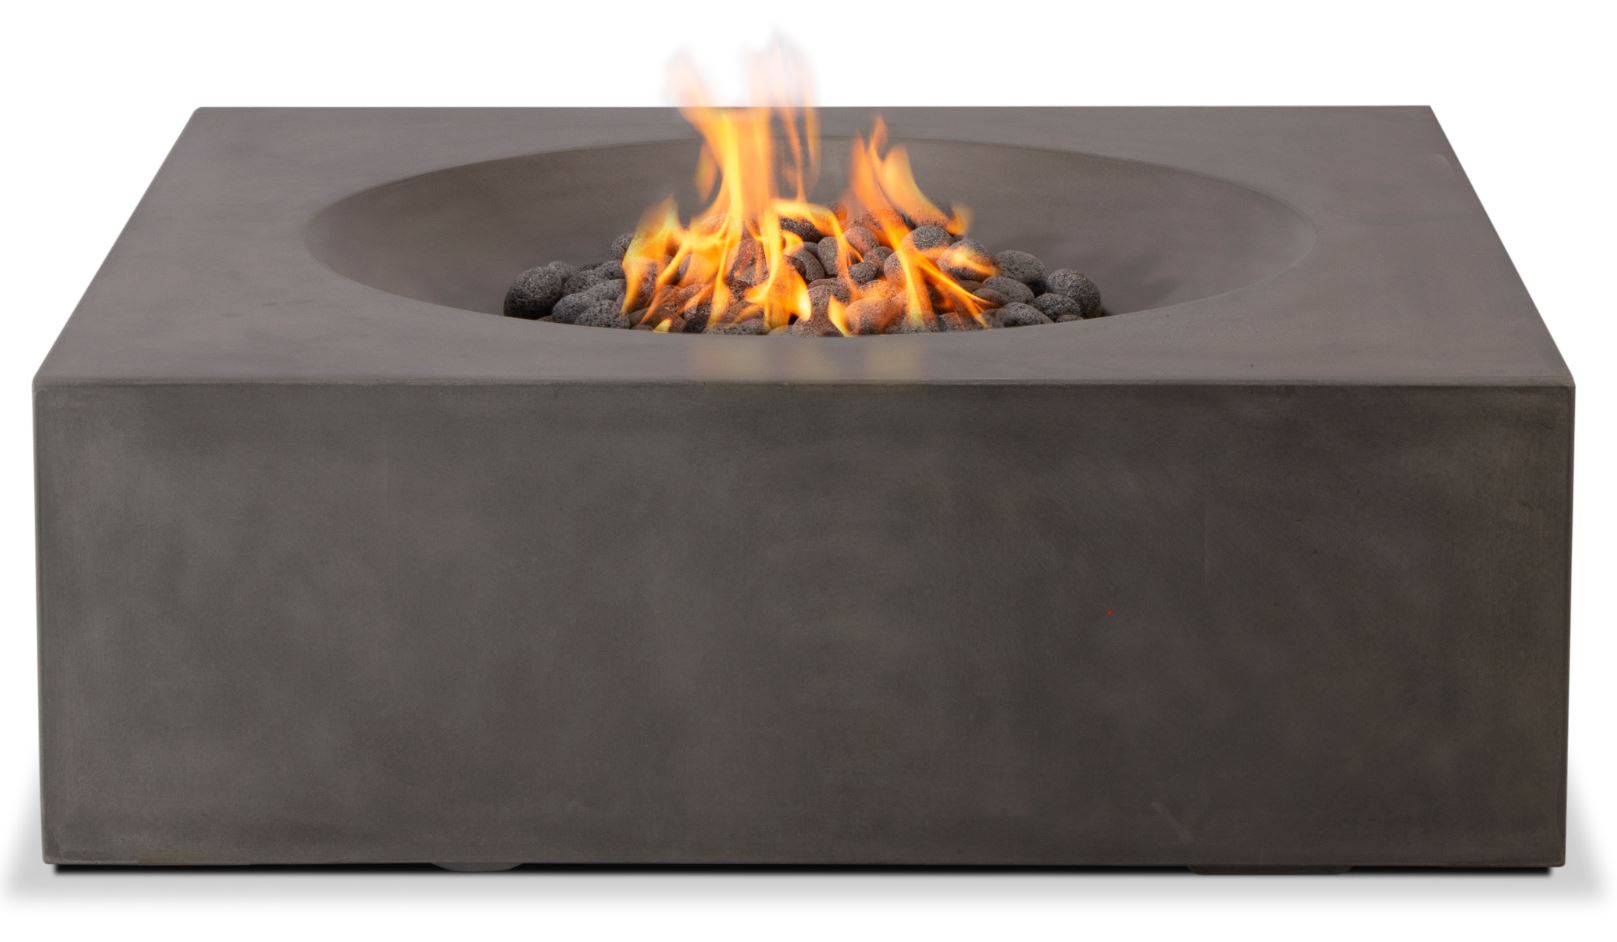 Tao Fire Table - The Professional Line